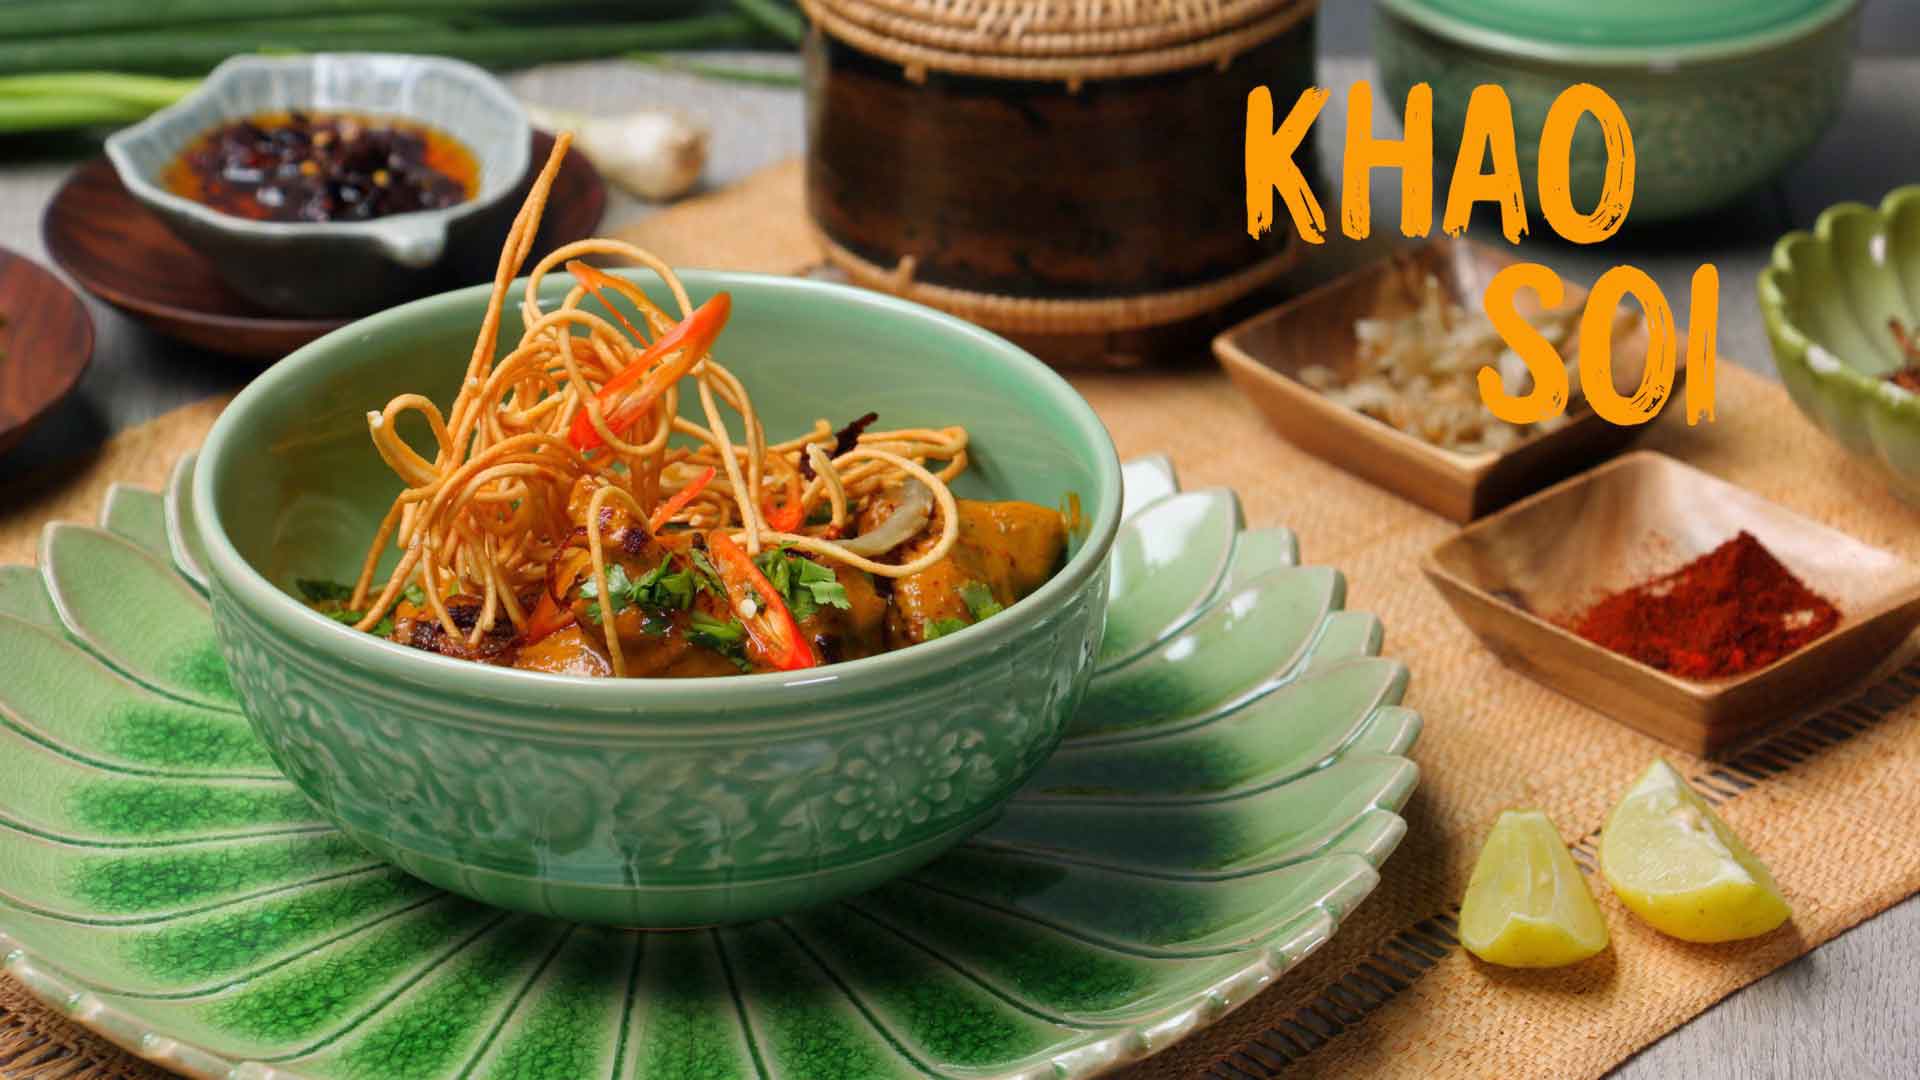 Khao Soi Recipe: How to make Chiang Mai Curried Noodles